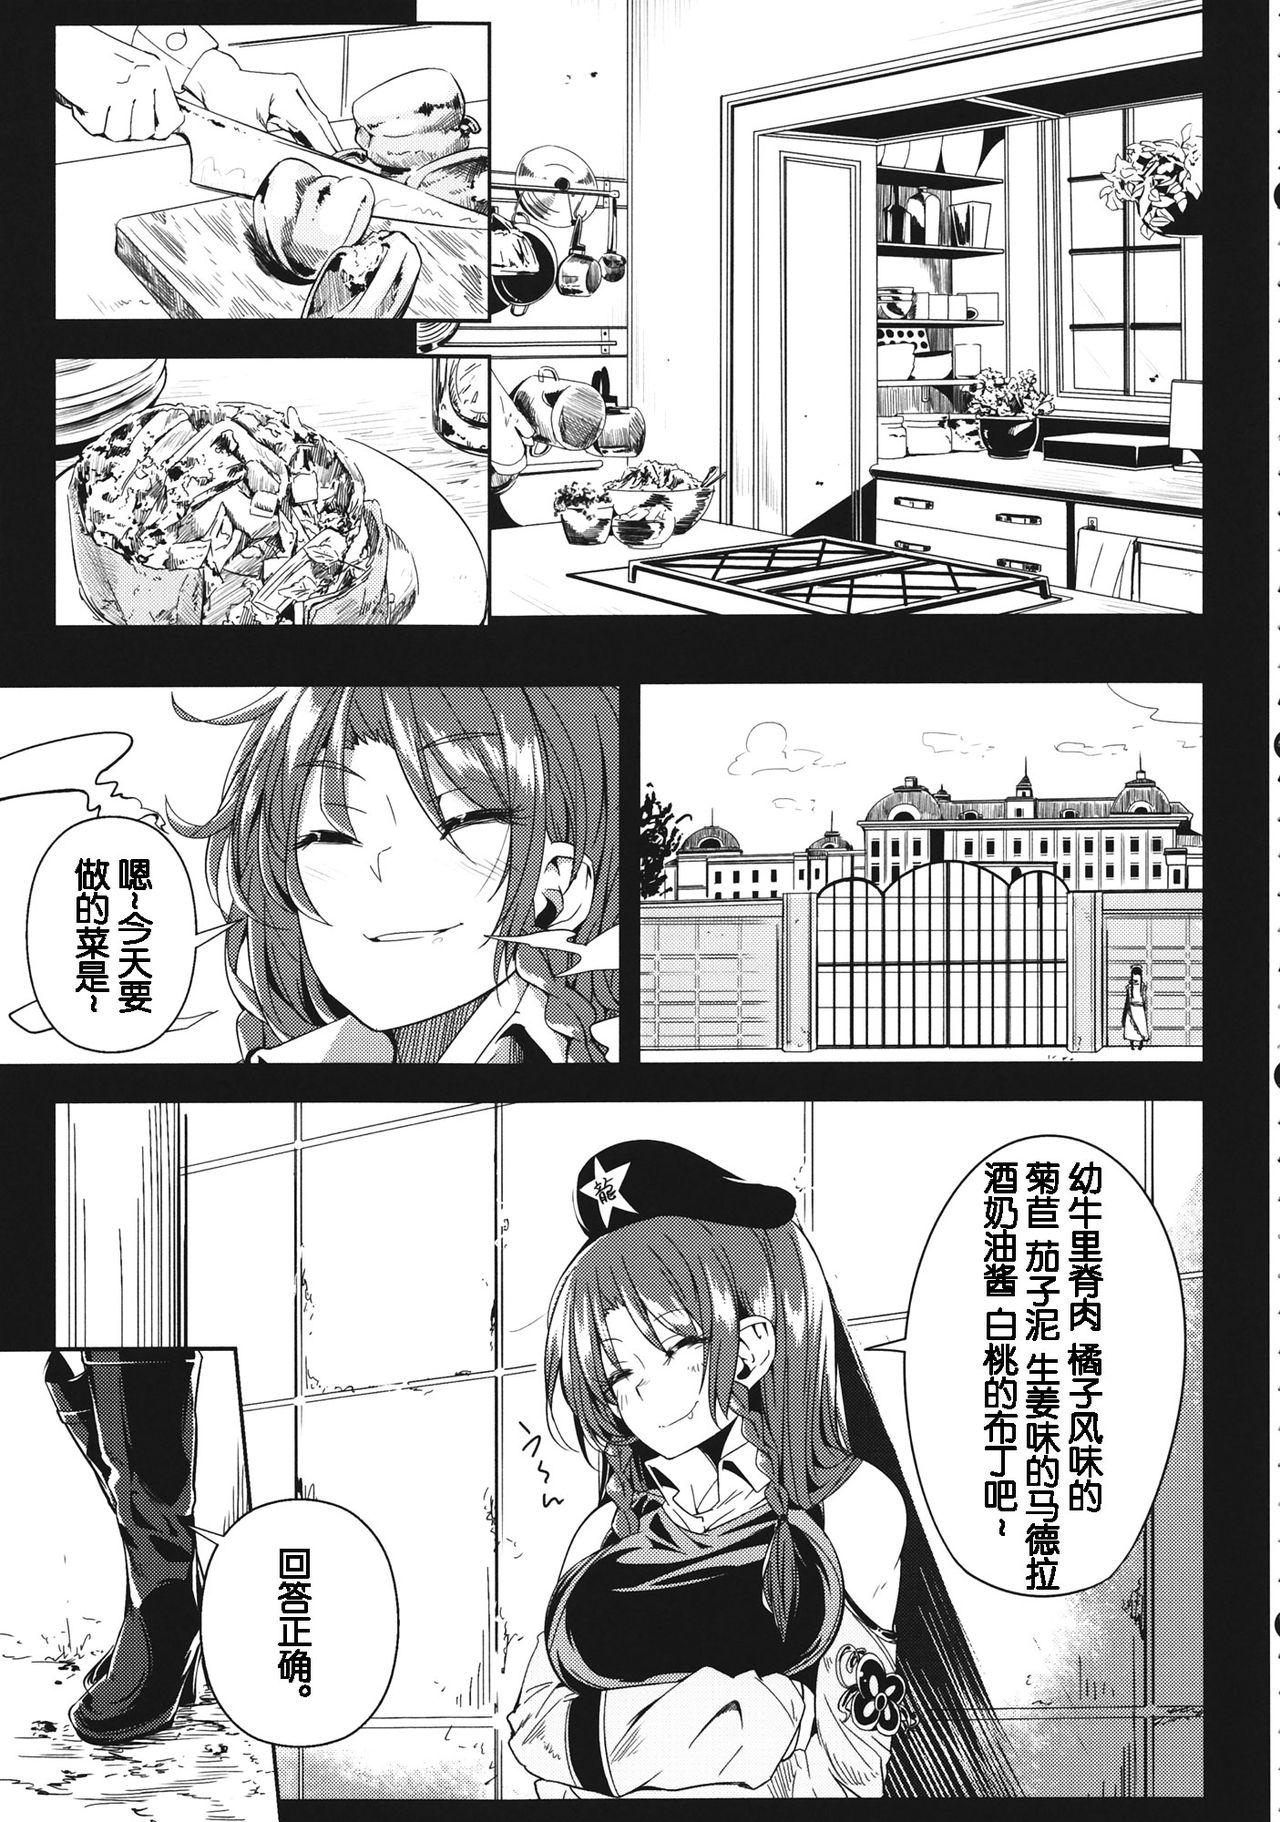 Lez Remember The Time. - Touhou project Moaning - Page 5